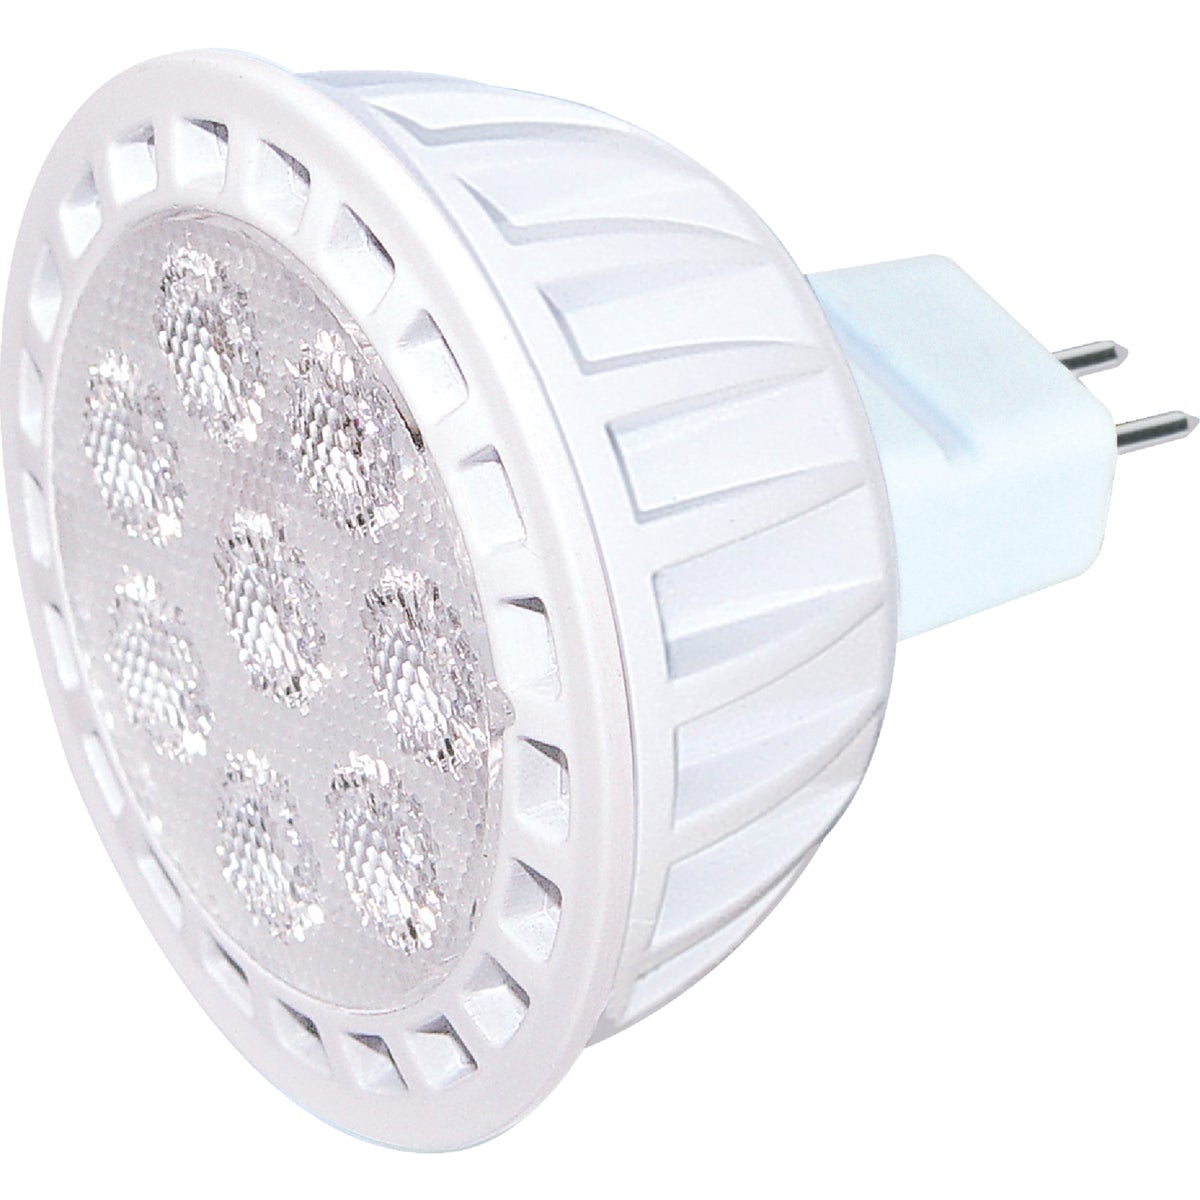 Item 501823, MR16 dimmable LED (light emitting diode) light bulb with GU5.3 base.